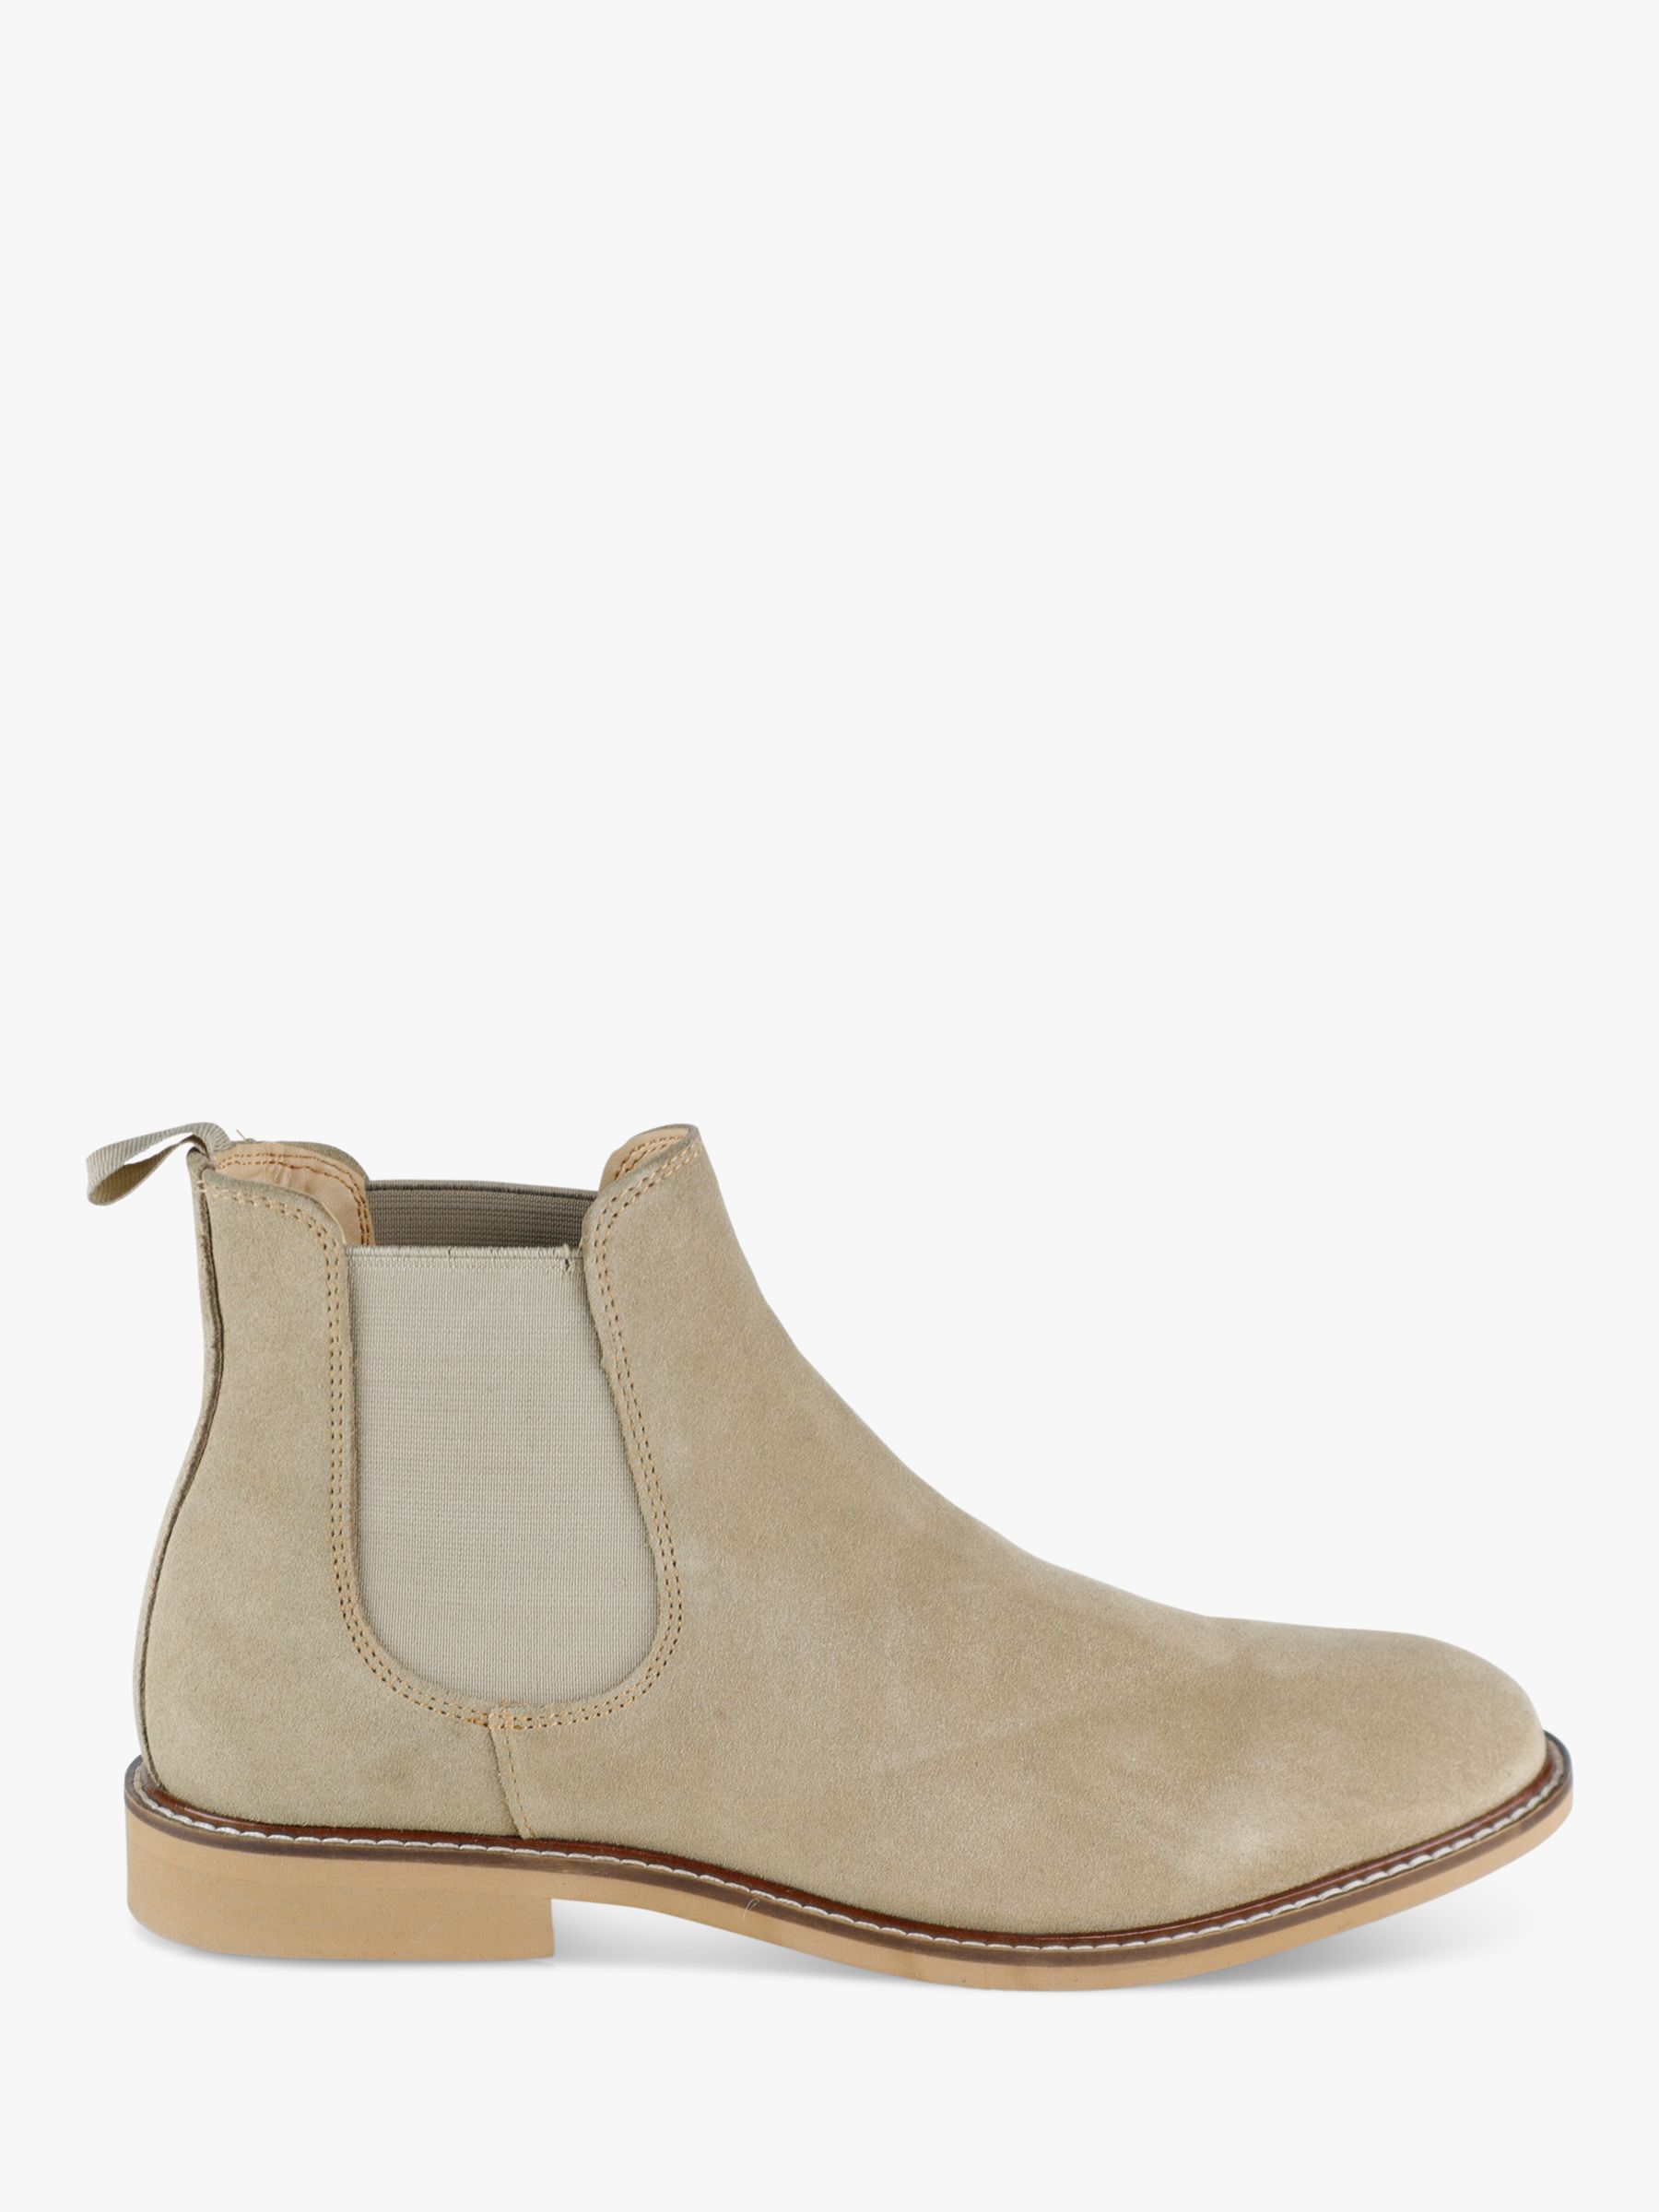 Silver Street London San Diego Suede Chelsea Boots, Sand at John Lewis ...